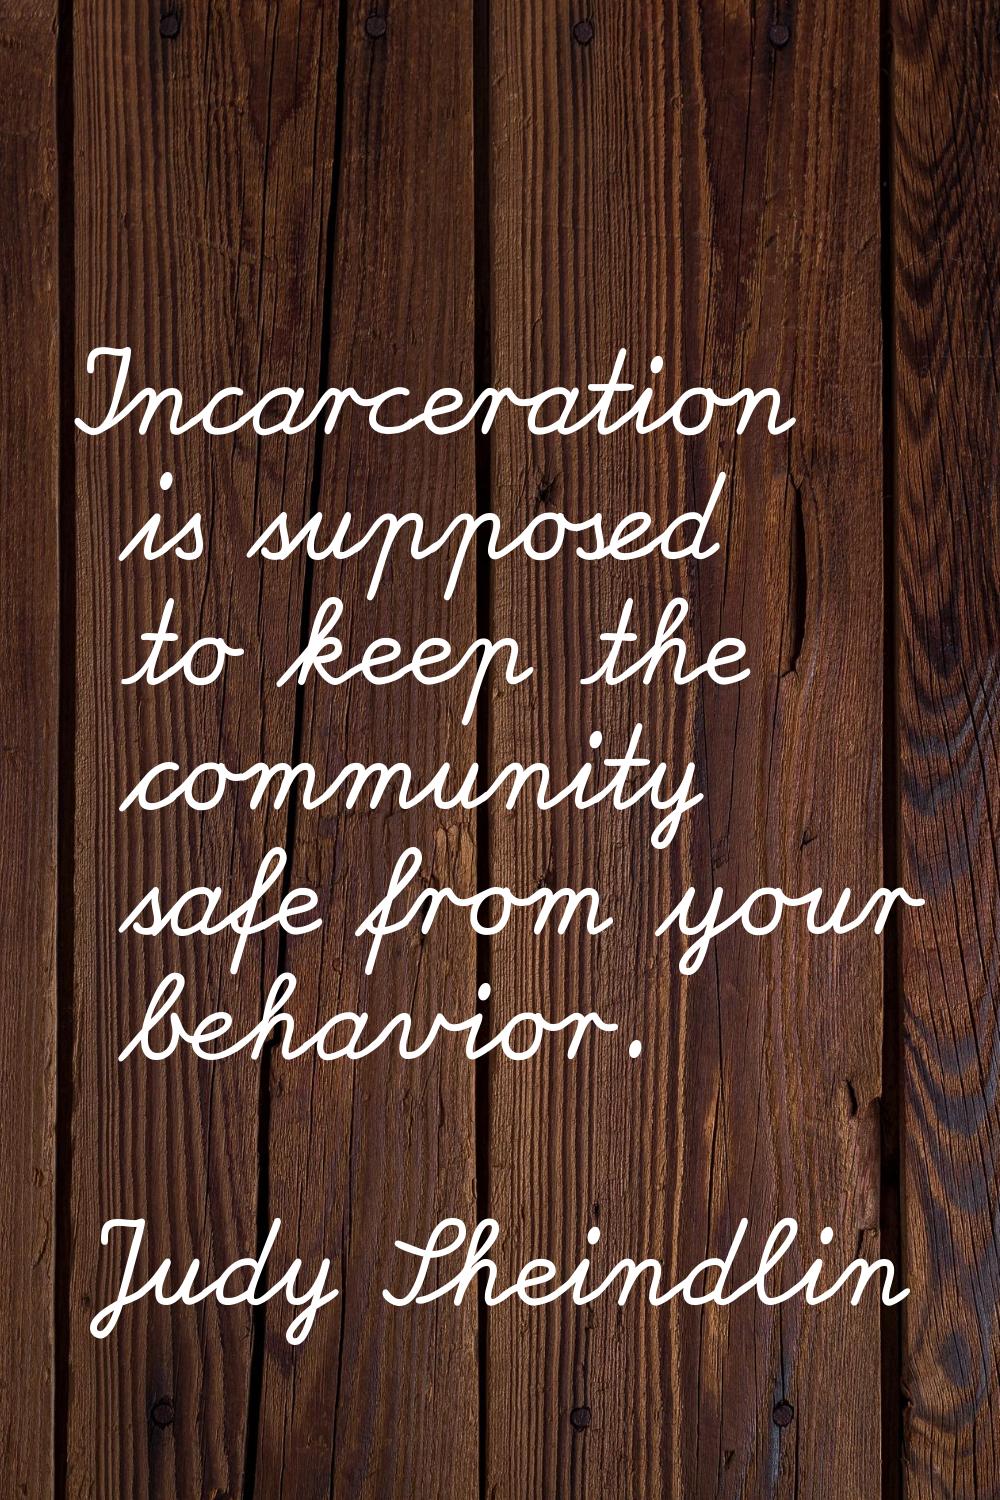 Incarceration is supposed to keep the community safe from your behavior.